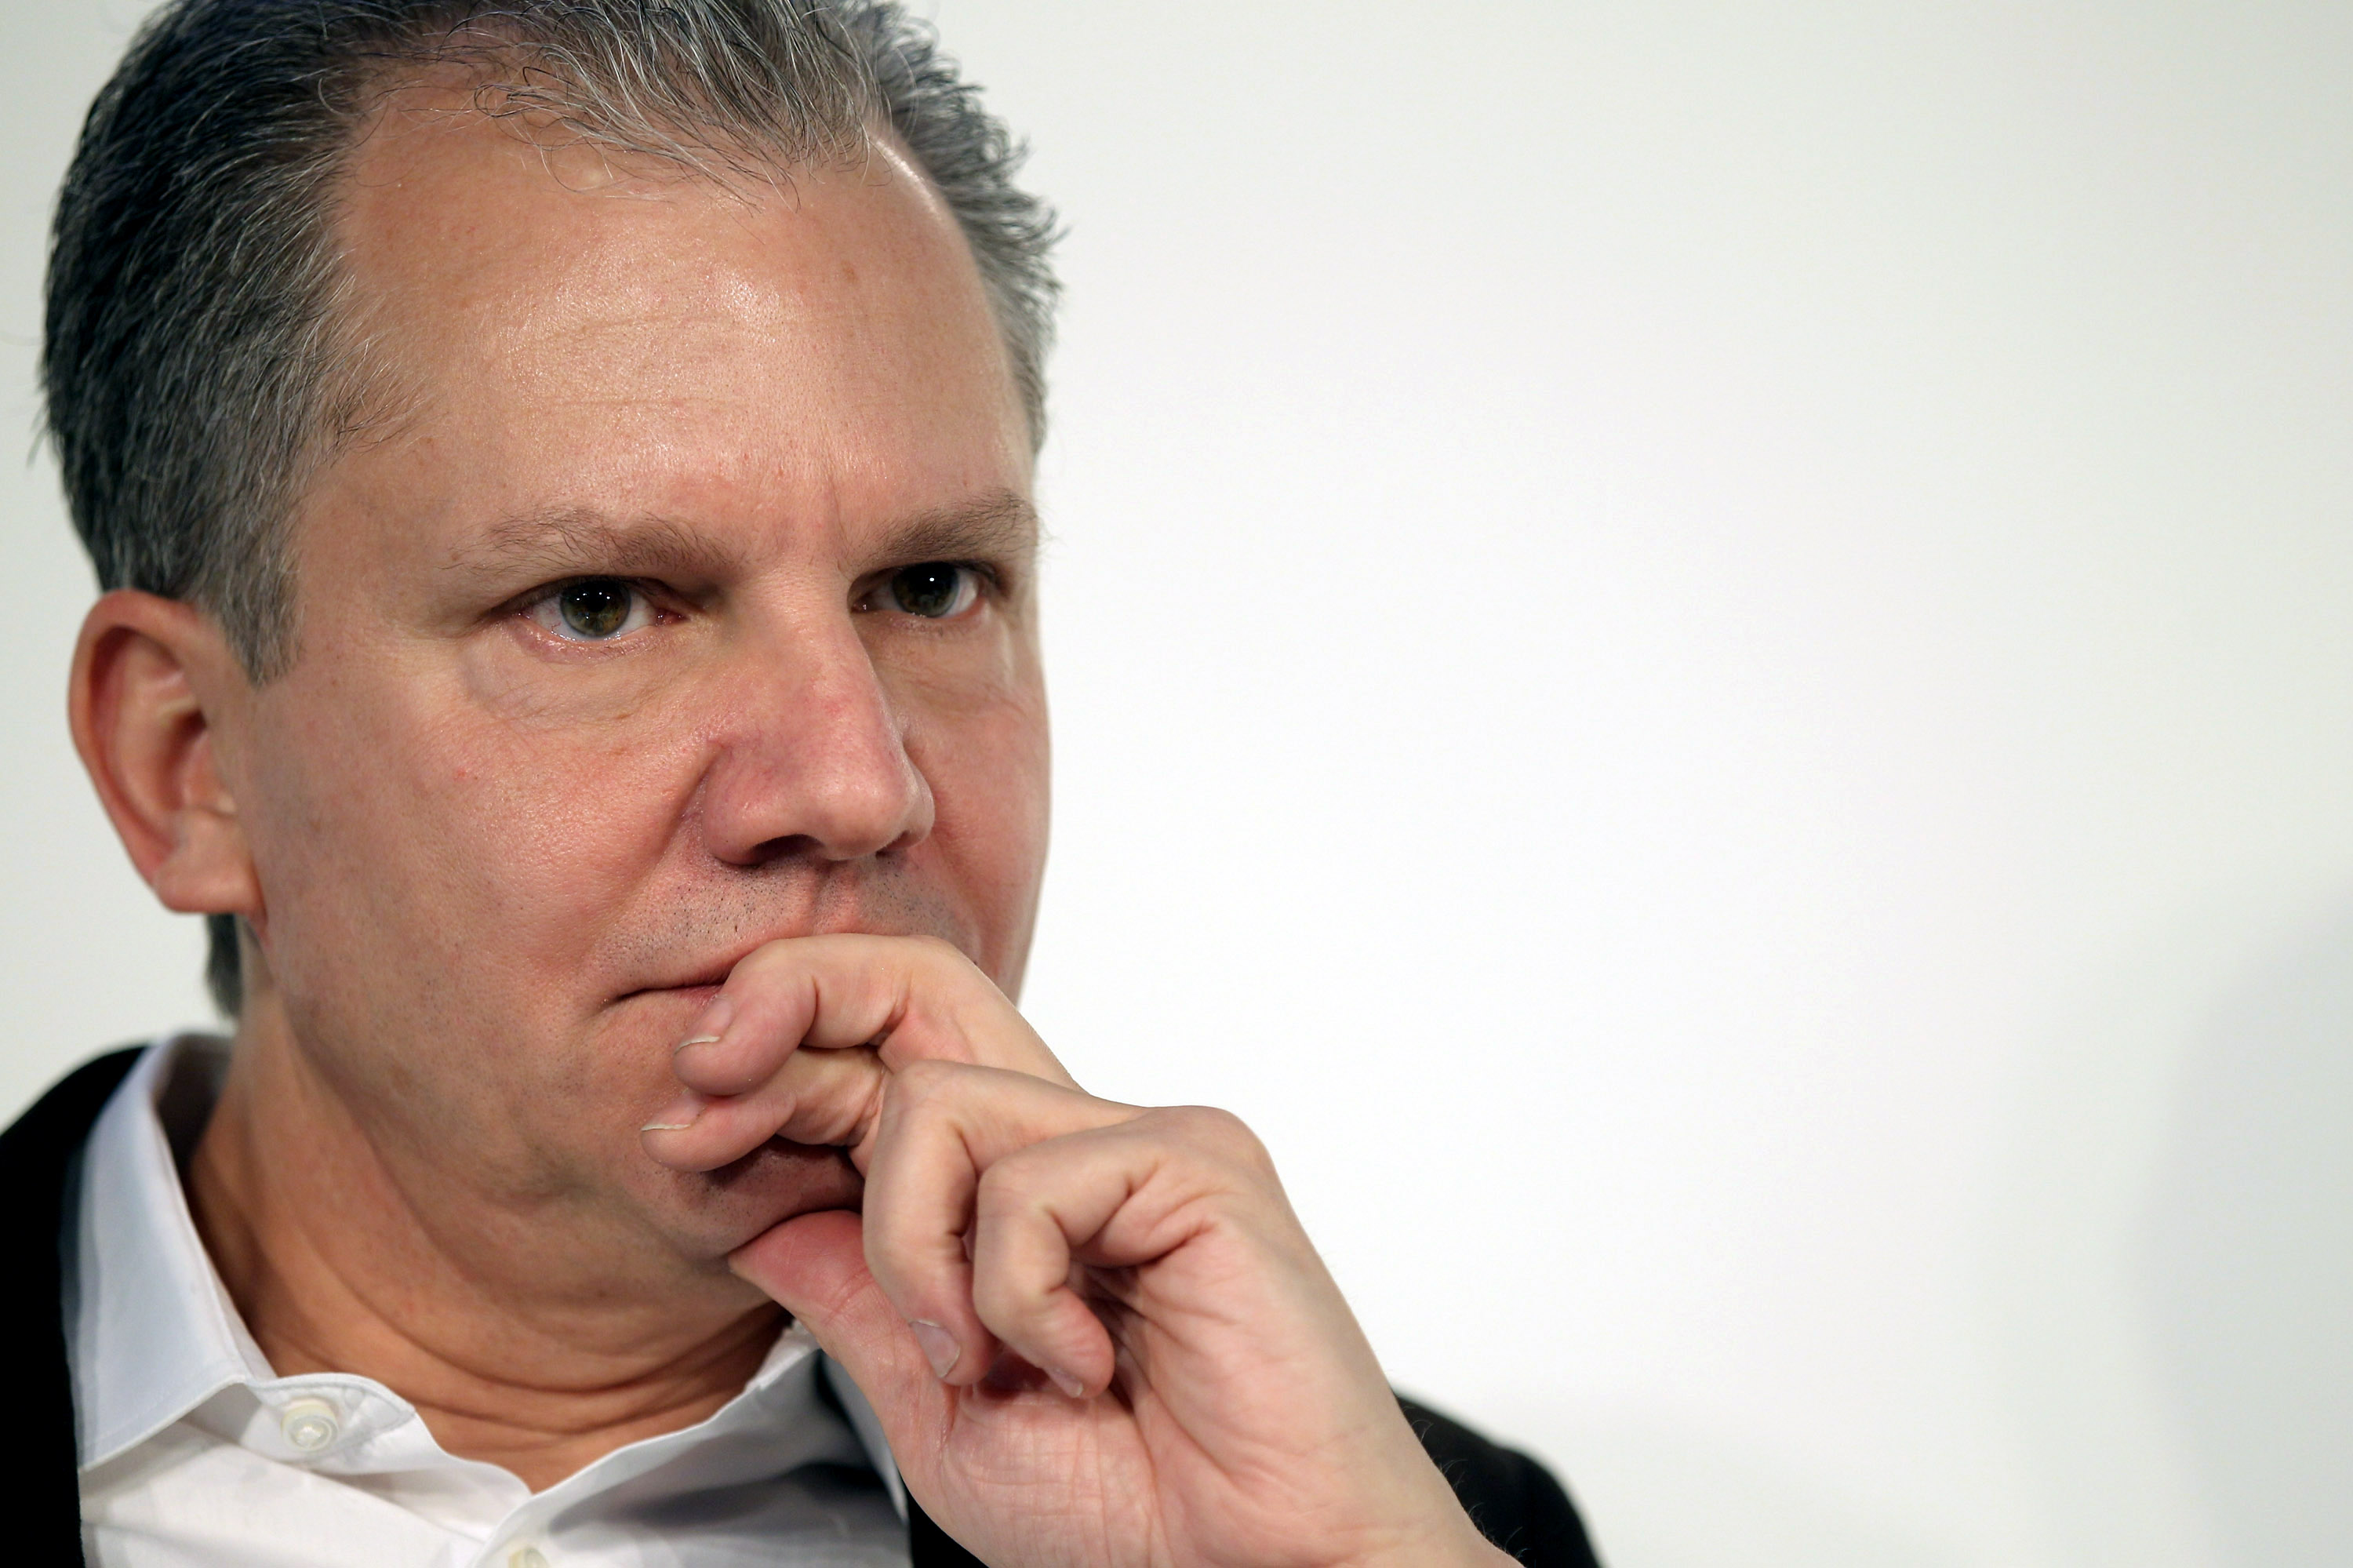 Arthur Sulzberger, chairman and publisher of The New York Times, looks on during the Digital Life Design (DLD) conference at HVB Forum on January 23, 2011 in Munich, Germany. (Miguel Villagran&mdash;Getty Images)